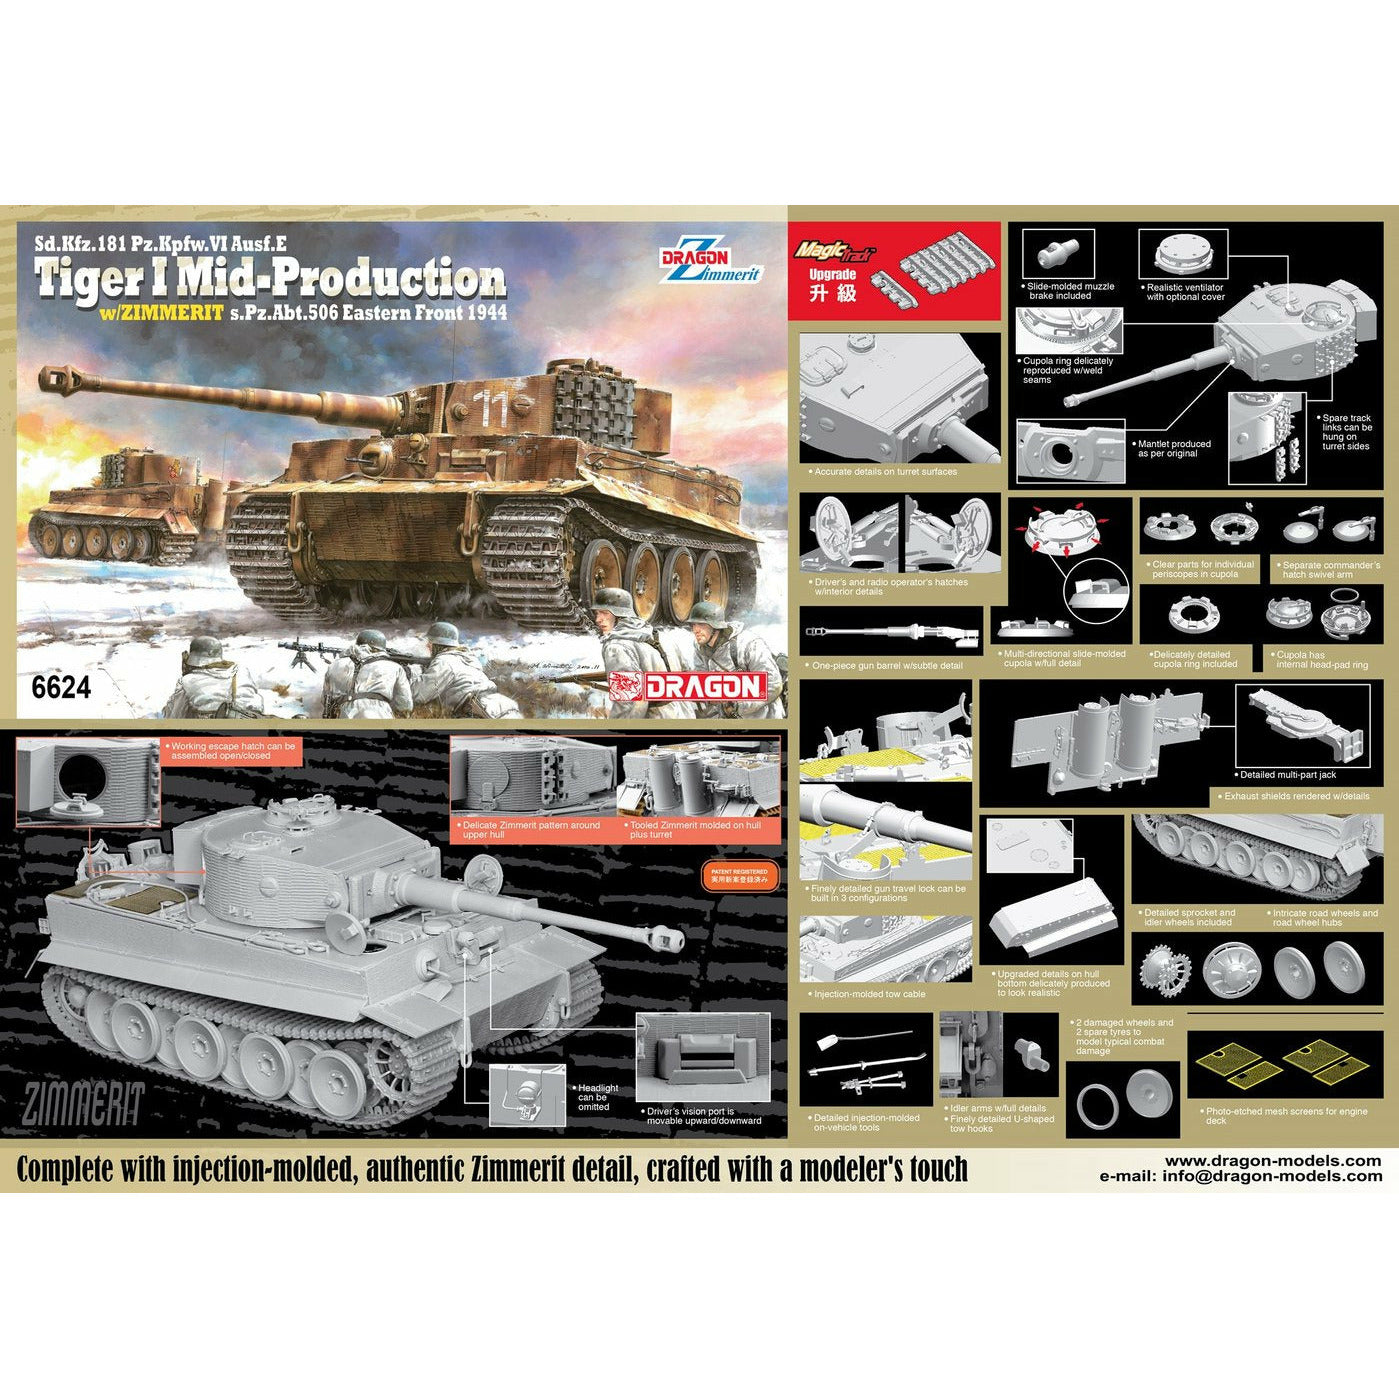 ‘39-45’ Series Sd.Kfz.181 Pz.Kpfw.VI Ausf.E Tiger I Mid Production w/Zimmerit s.Pz.Abt.506 Eastern Front 1944 1/35 #6624 by Dragon Models